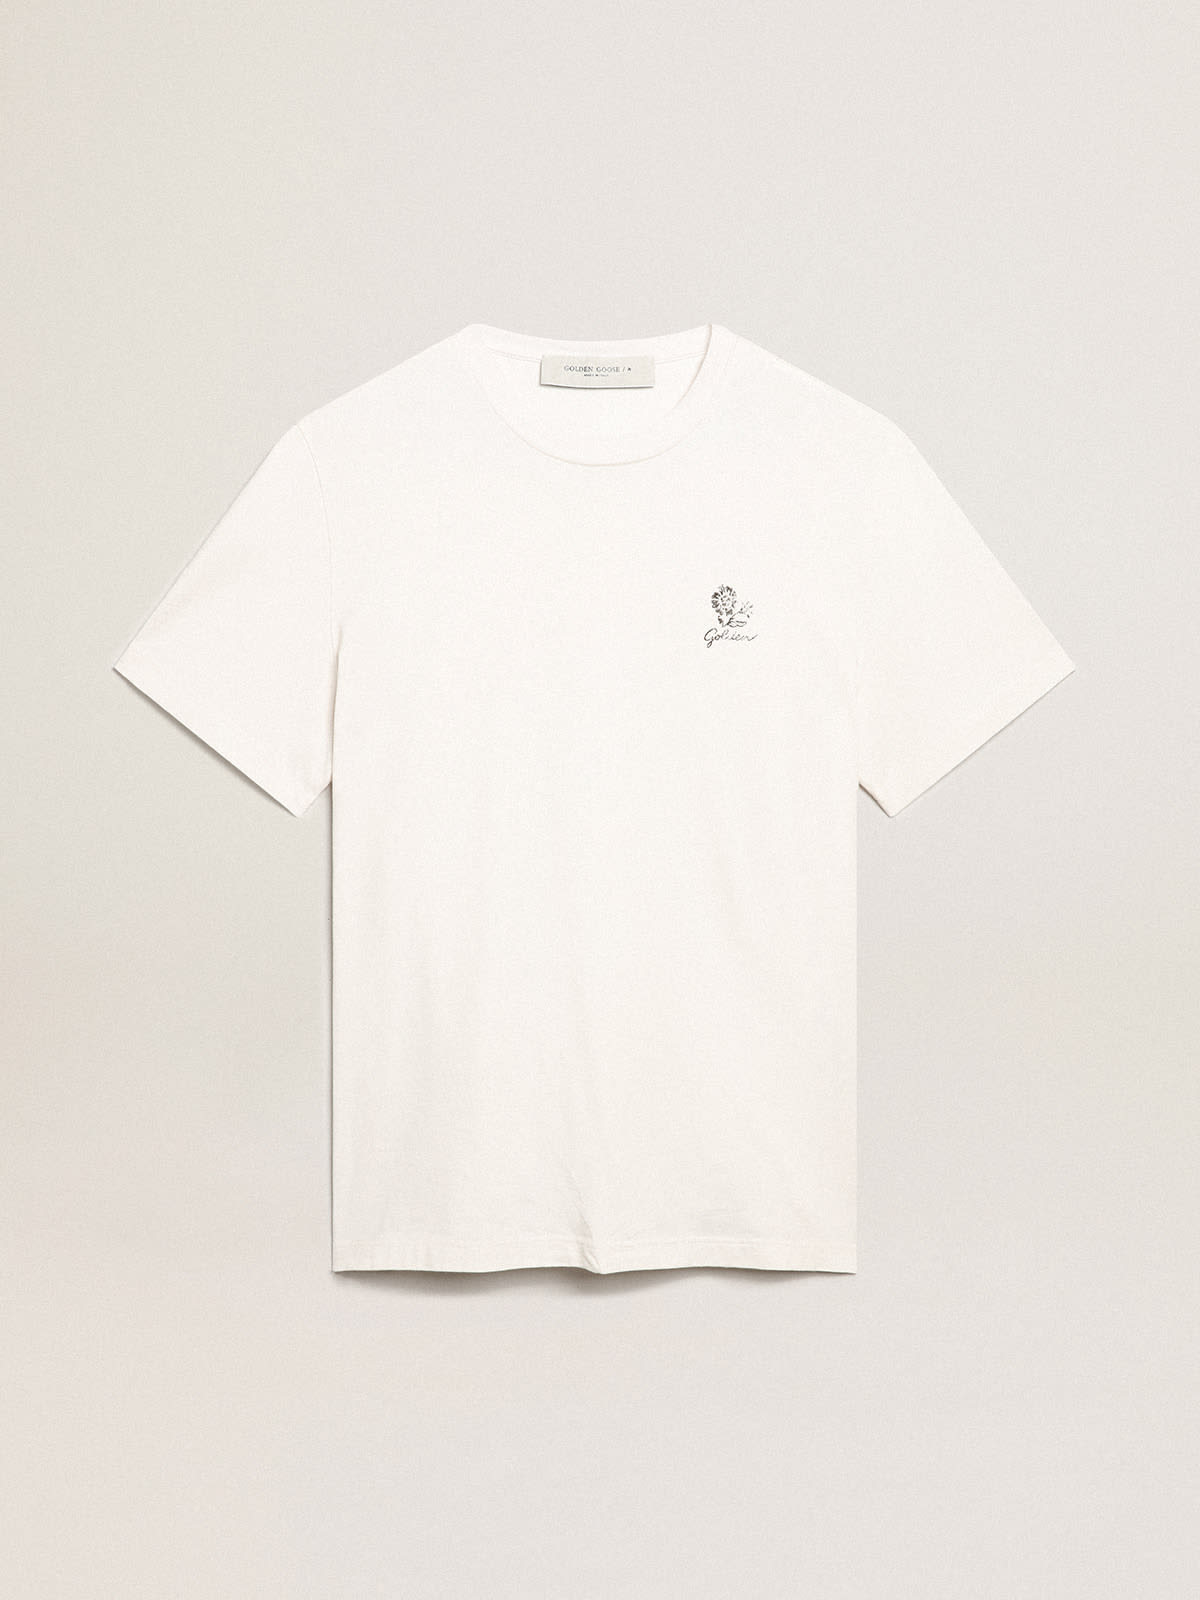 Golden Goose - Resort Collection linen T-shirt in vintage white cotton with printed flower in 